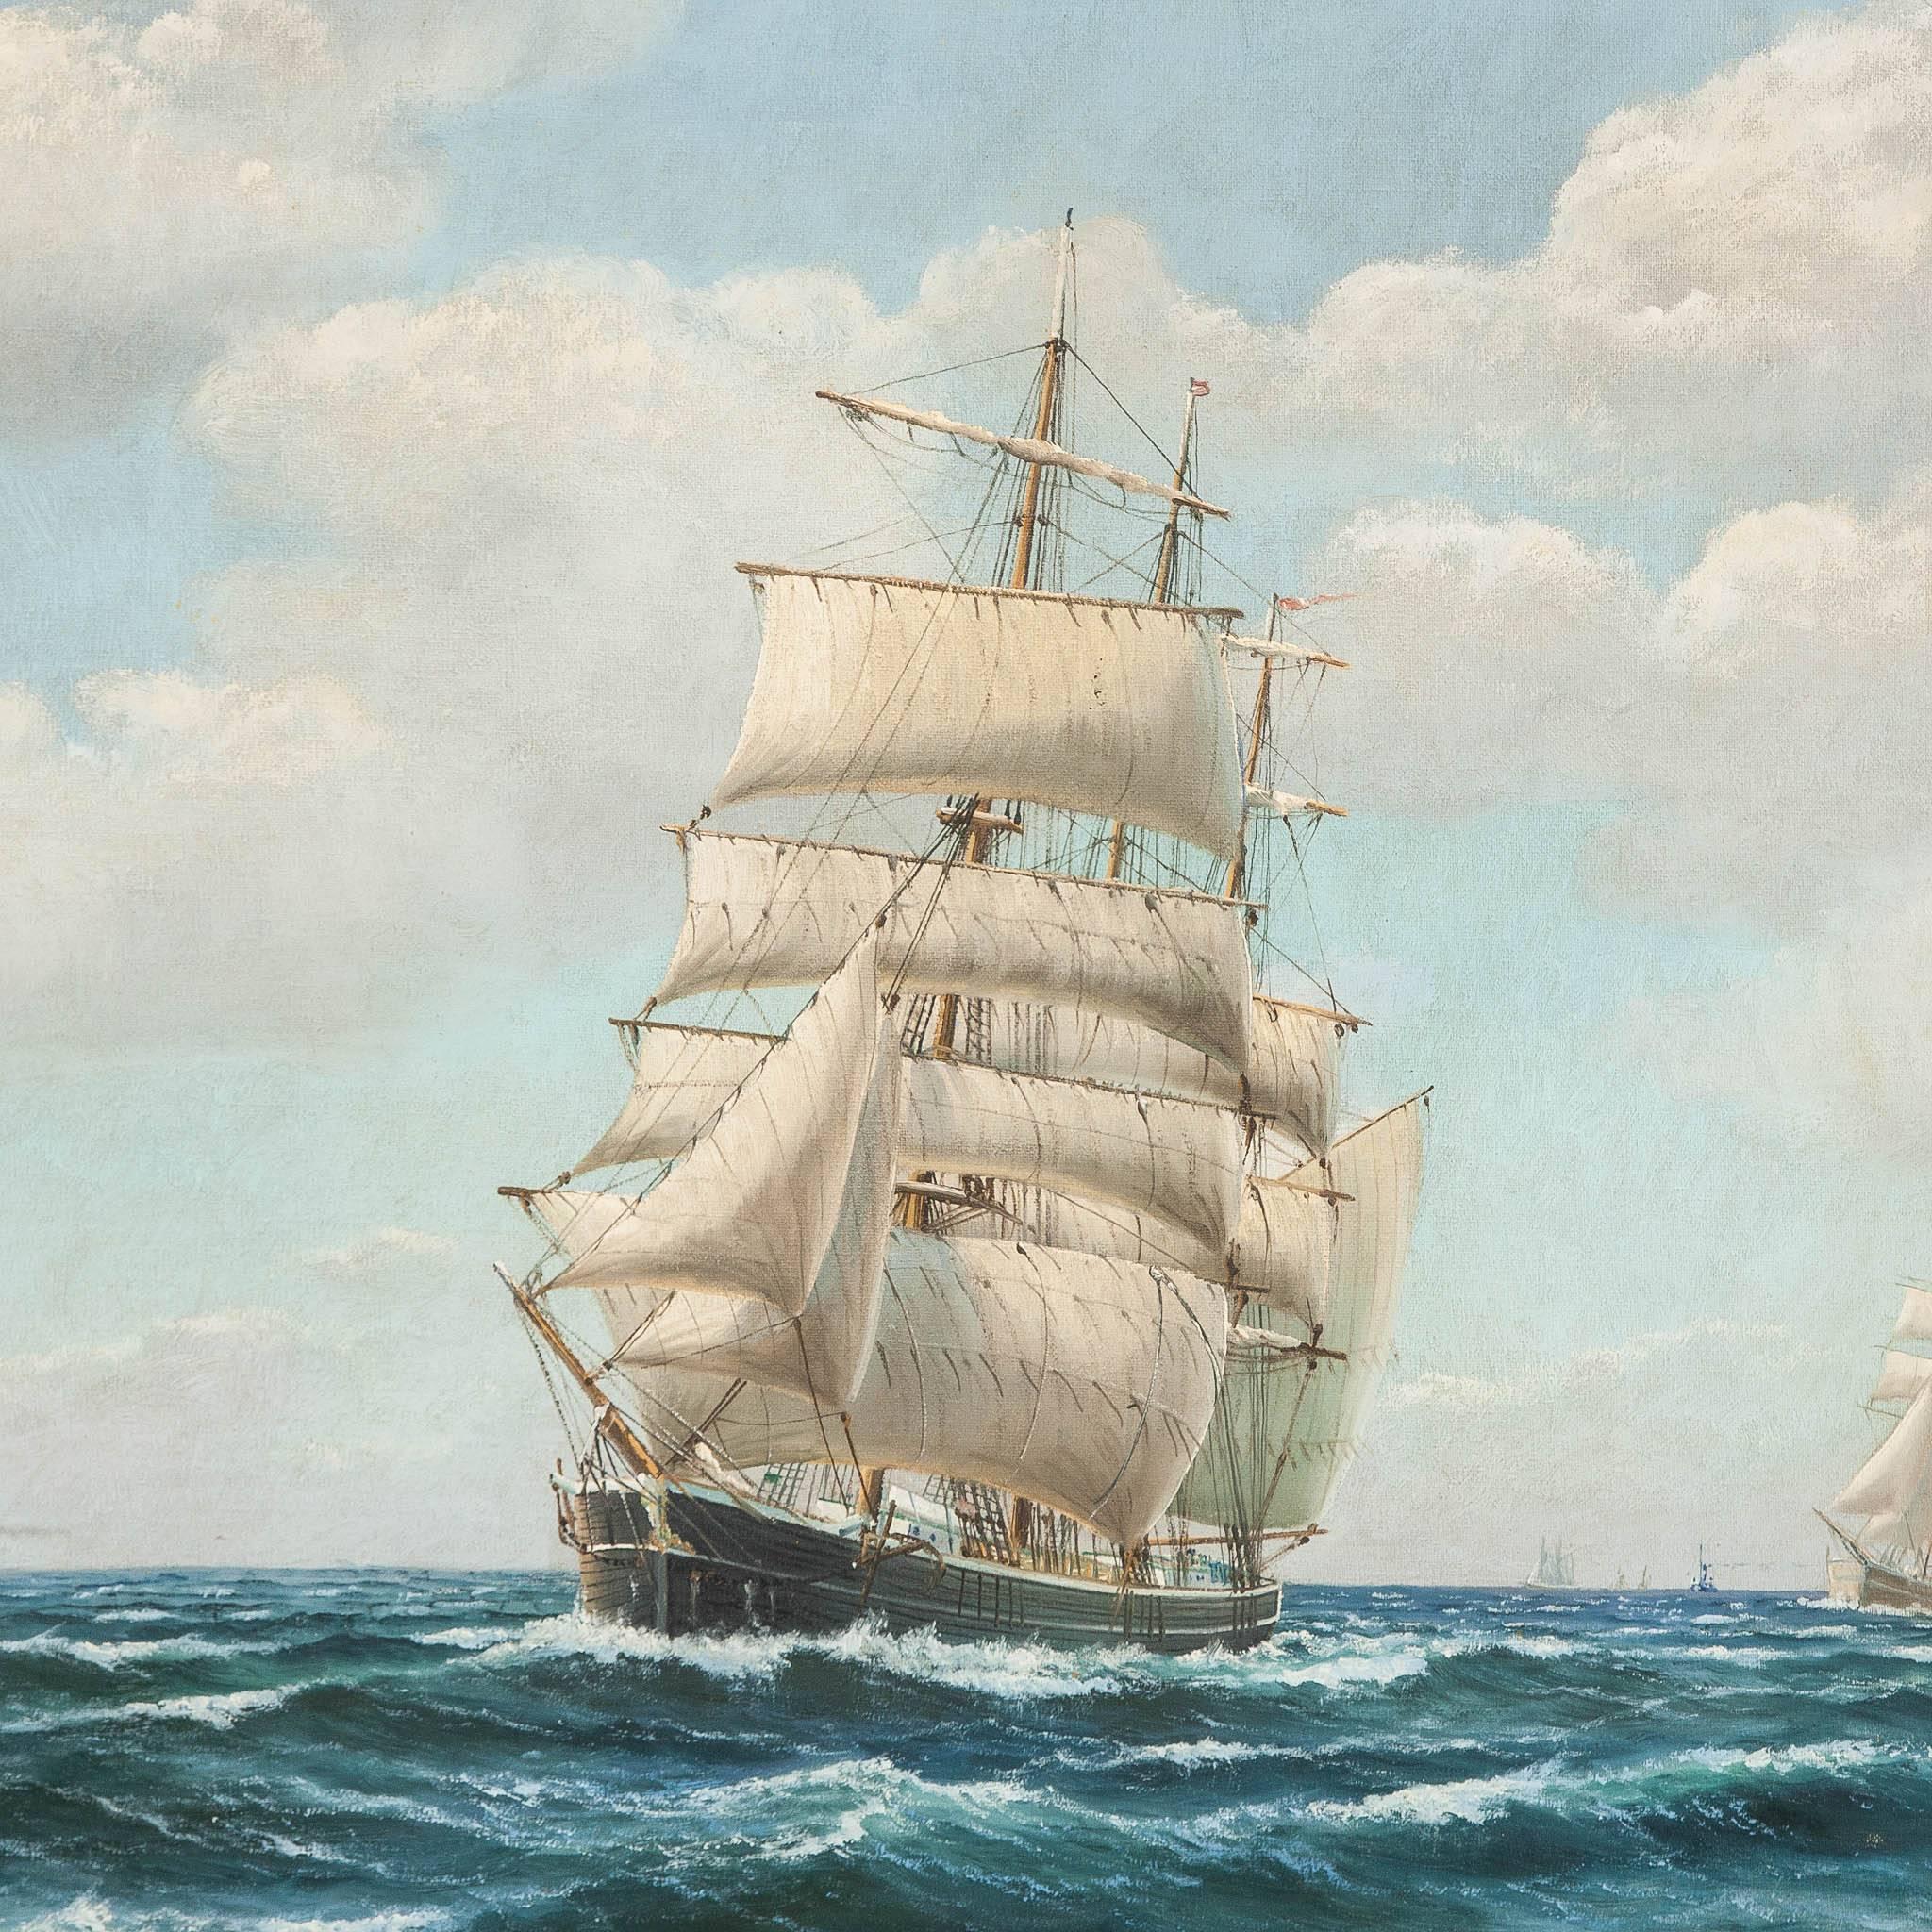 A mid-1920s framed oil on canvas of two ships at sail by the Danish marine artist Frederik Ernlund (1879-1957).

Signed in bottom right corner: Fr Ernlund.
 